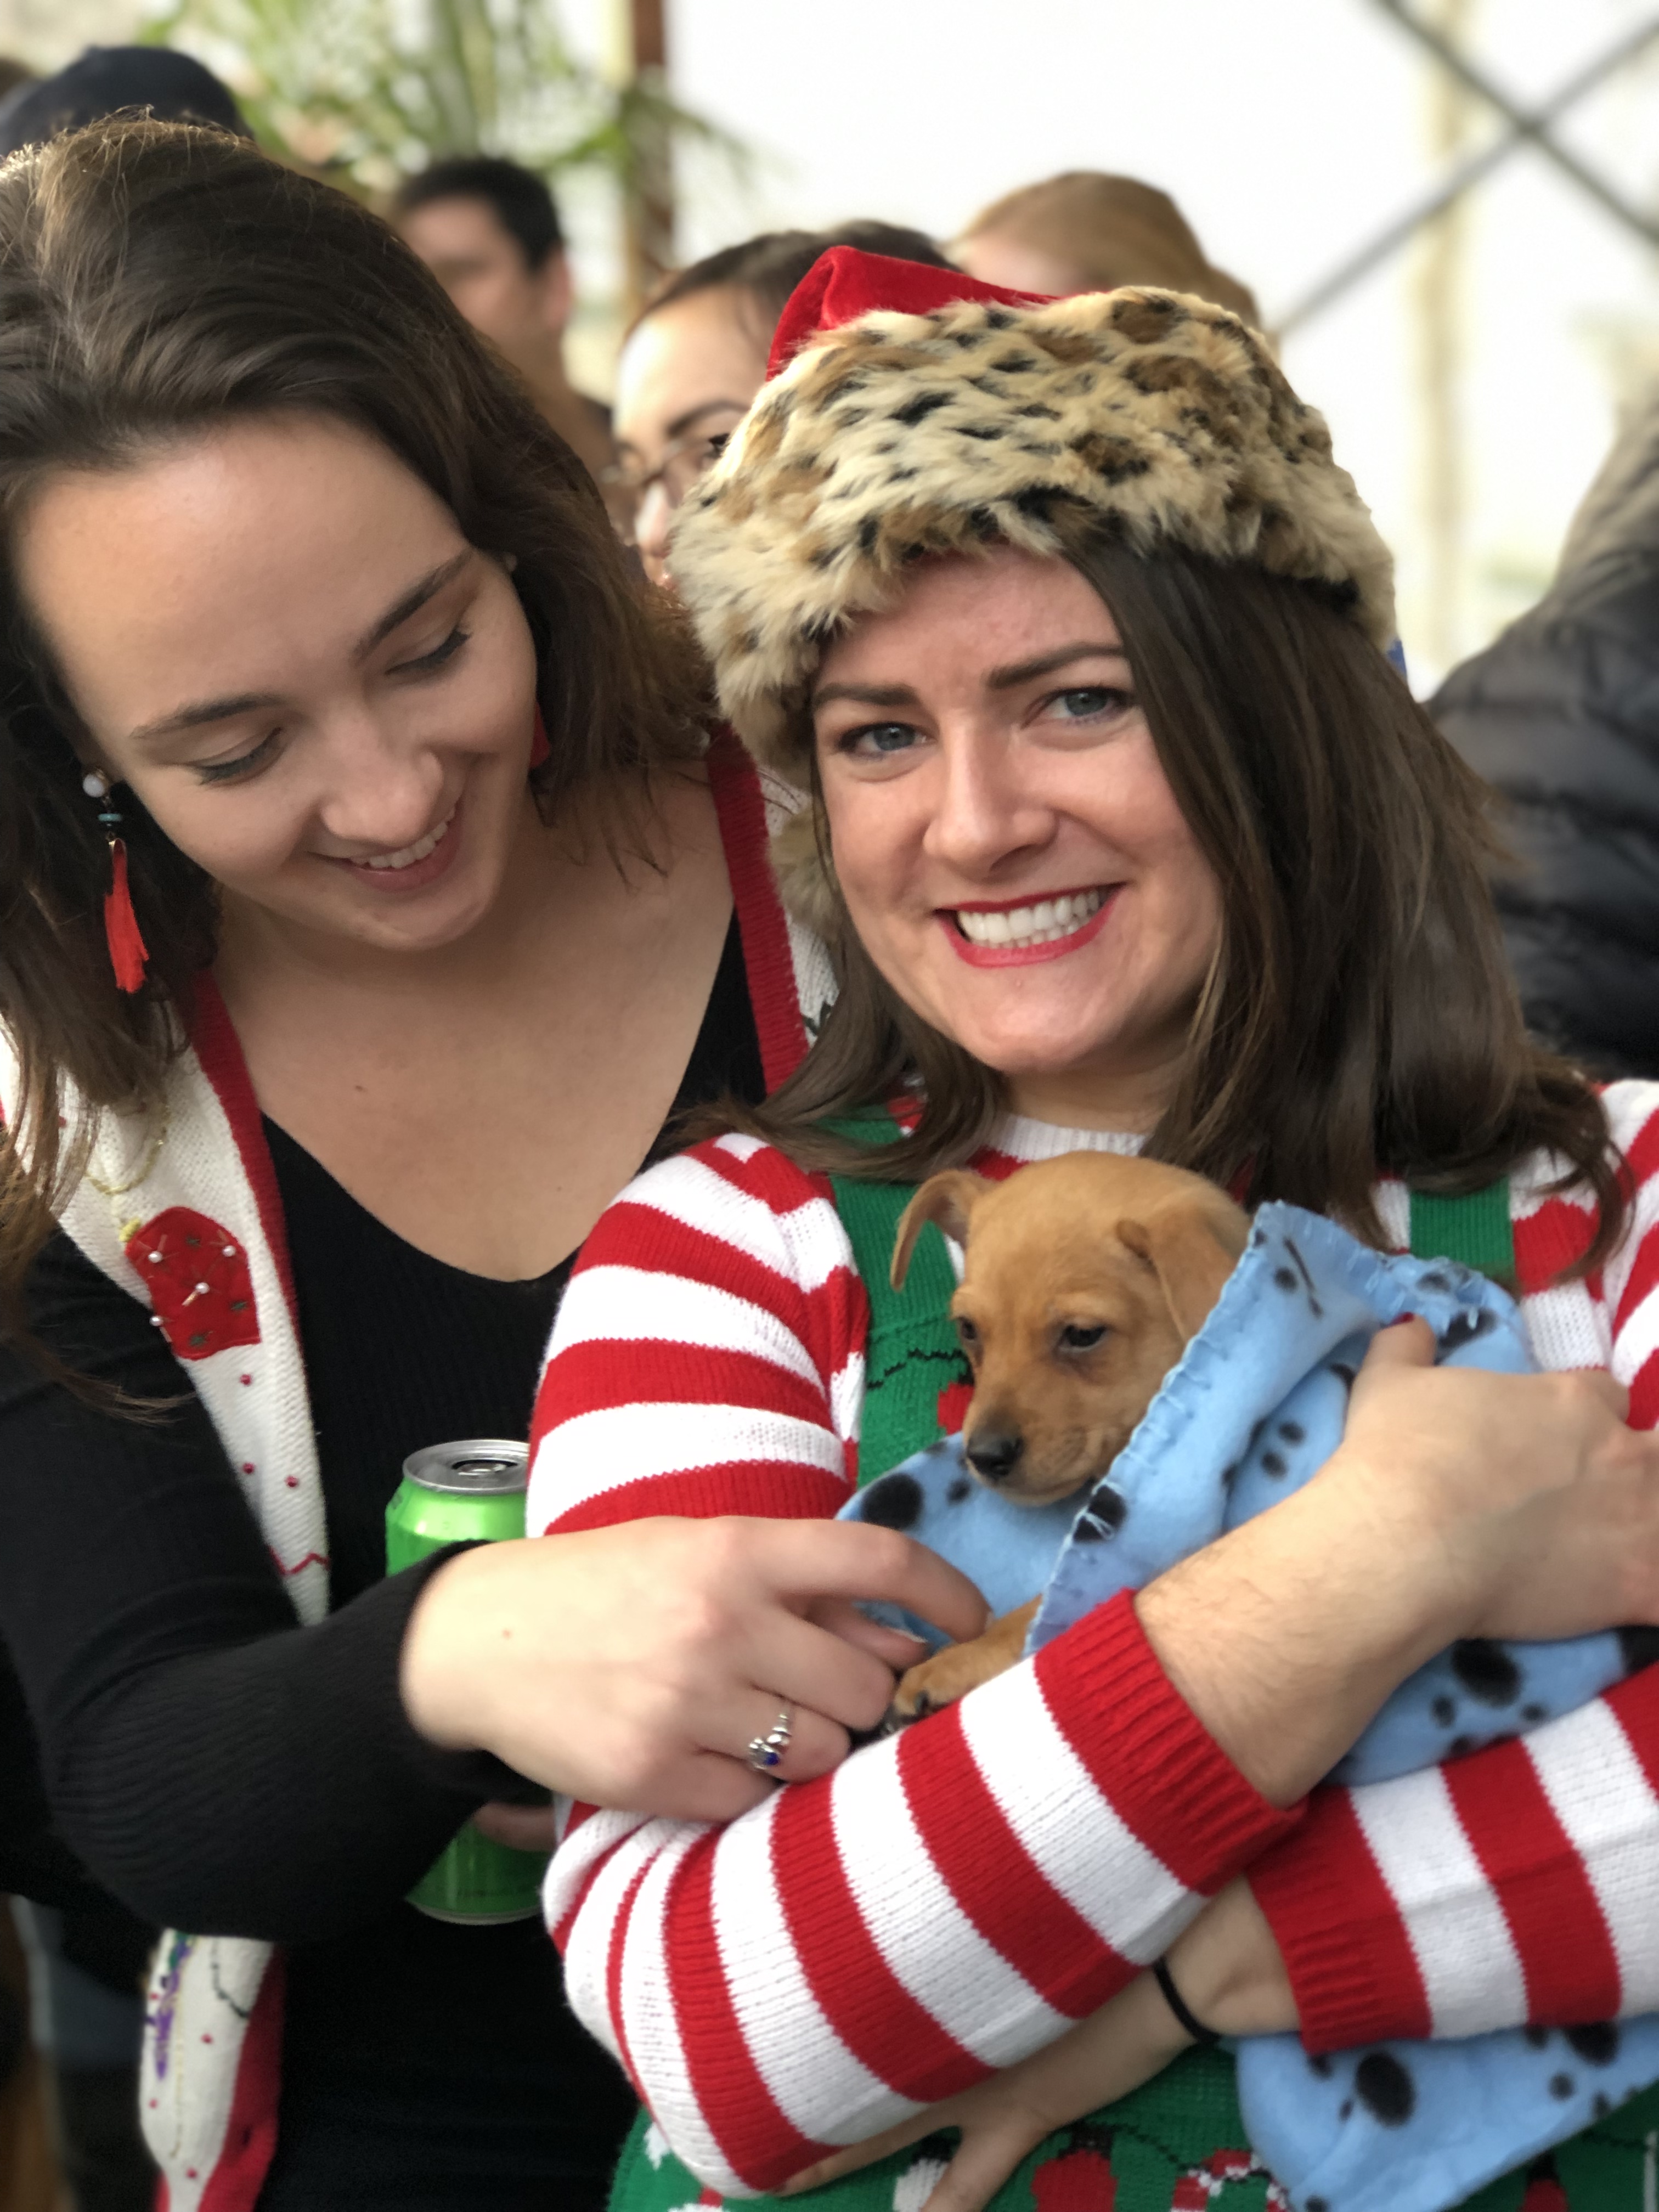 Two girls with puppies at a corporate holiday event with Puppy Love!